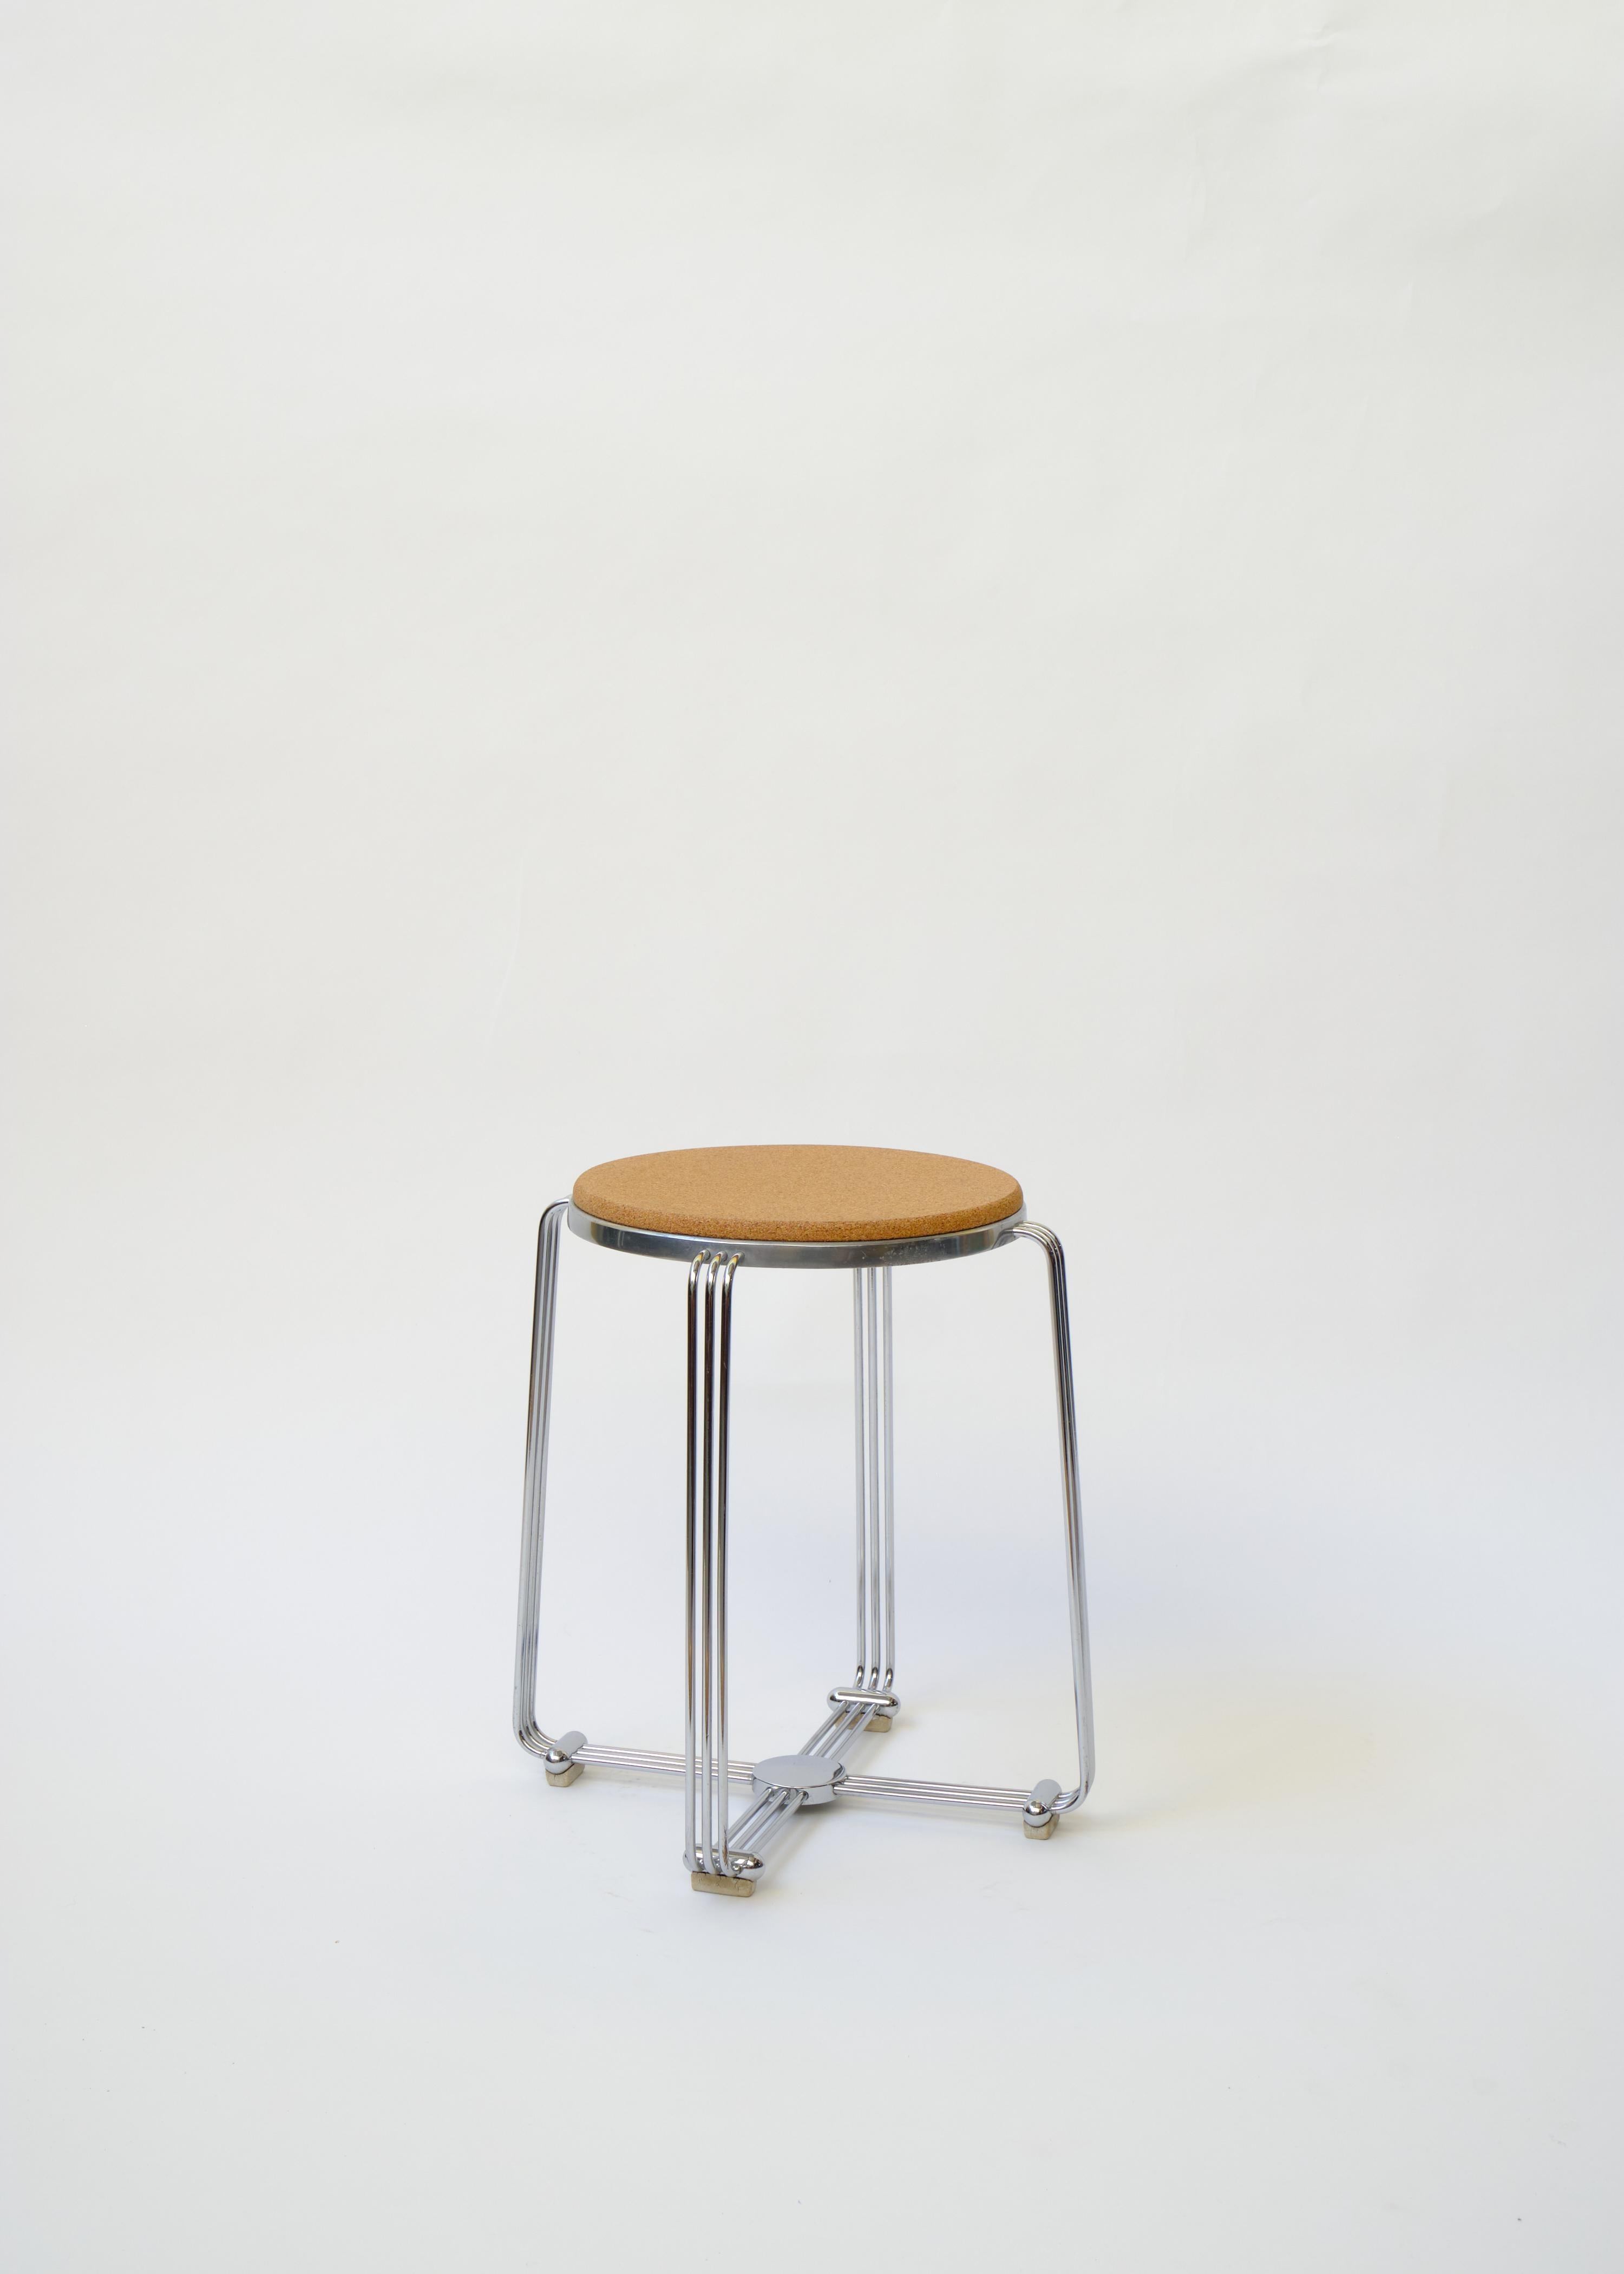 Cast aluminium base supported by four continuous splaying tubular chromed legs joined at the base by a central boss. Rubber feet are all original. The cork seats were long perished and have recently been replaced with new bevelled edge cork seats,